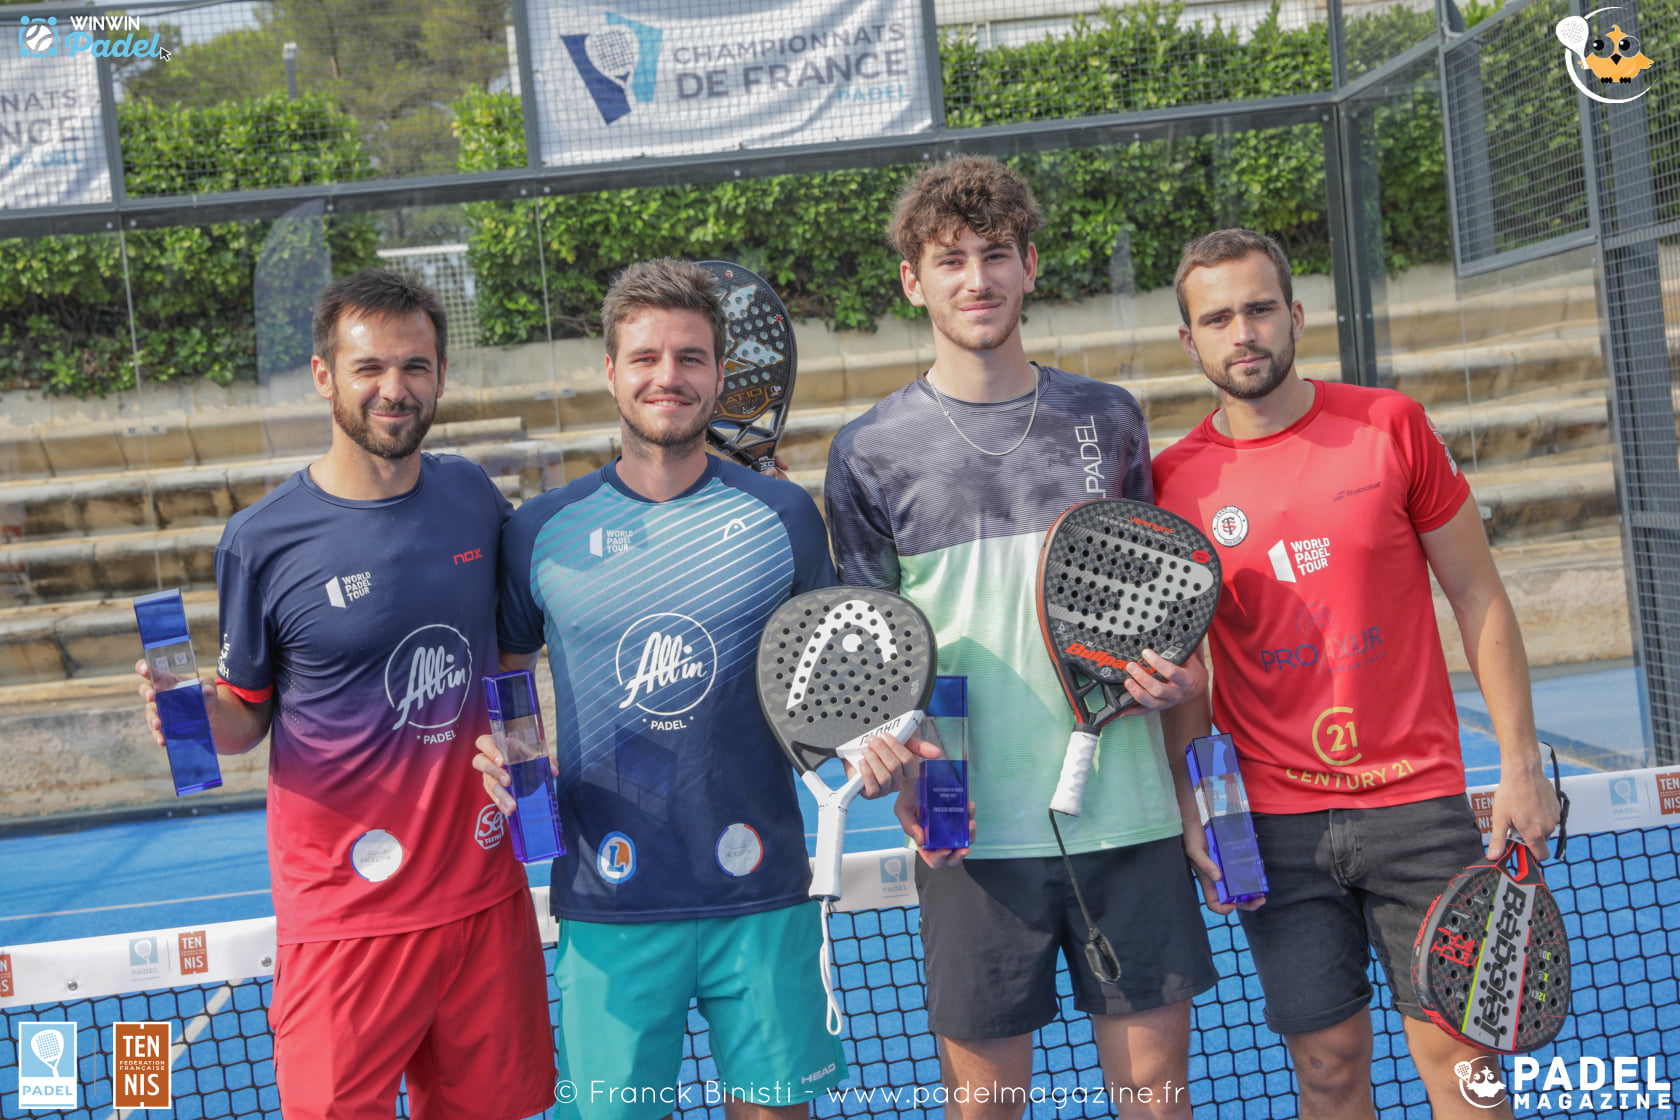 P2000 Toulouse: revenge for the French Championship in the final!